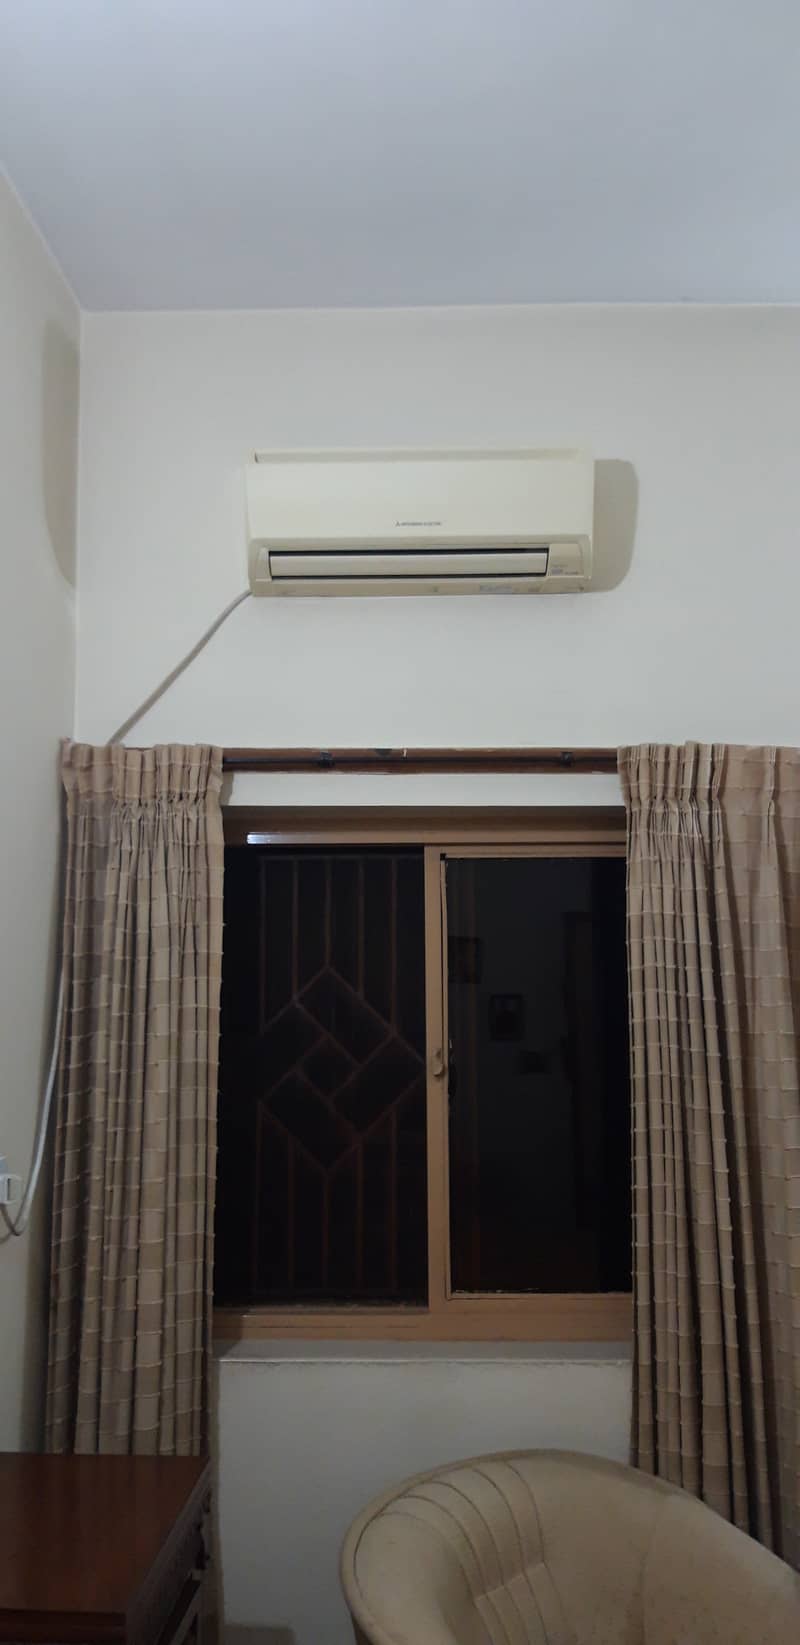 Air conditioners 2